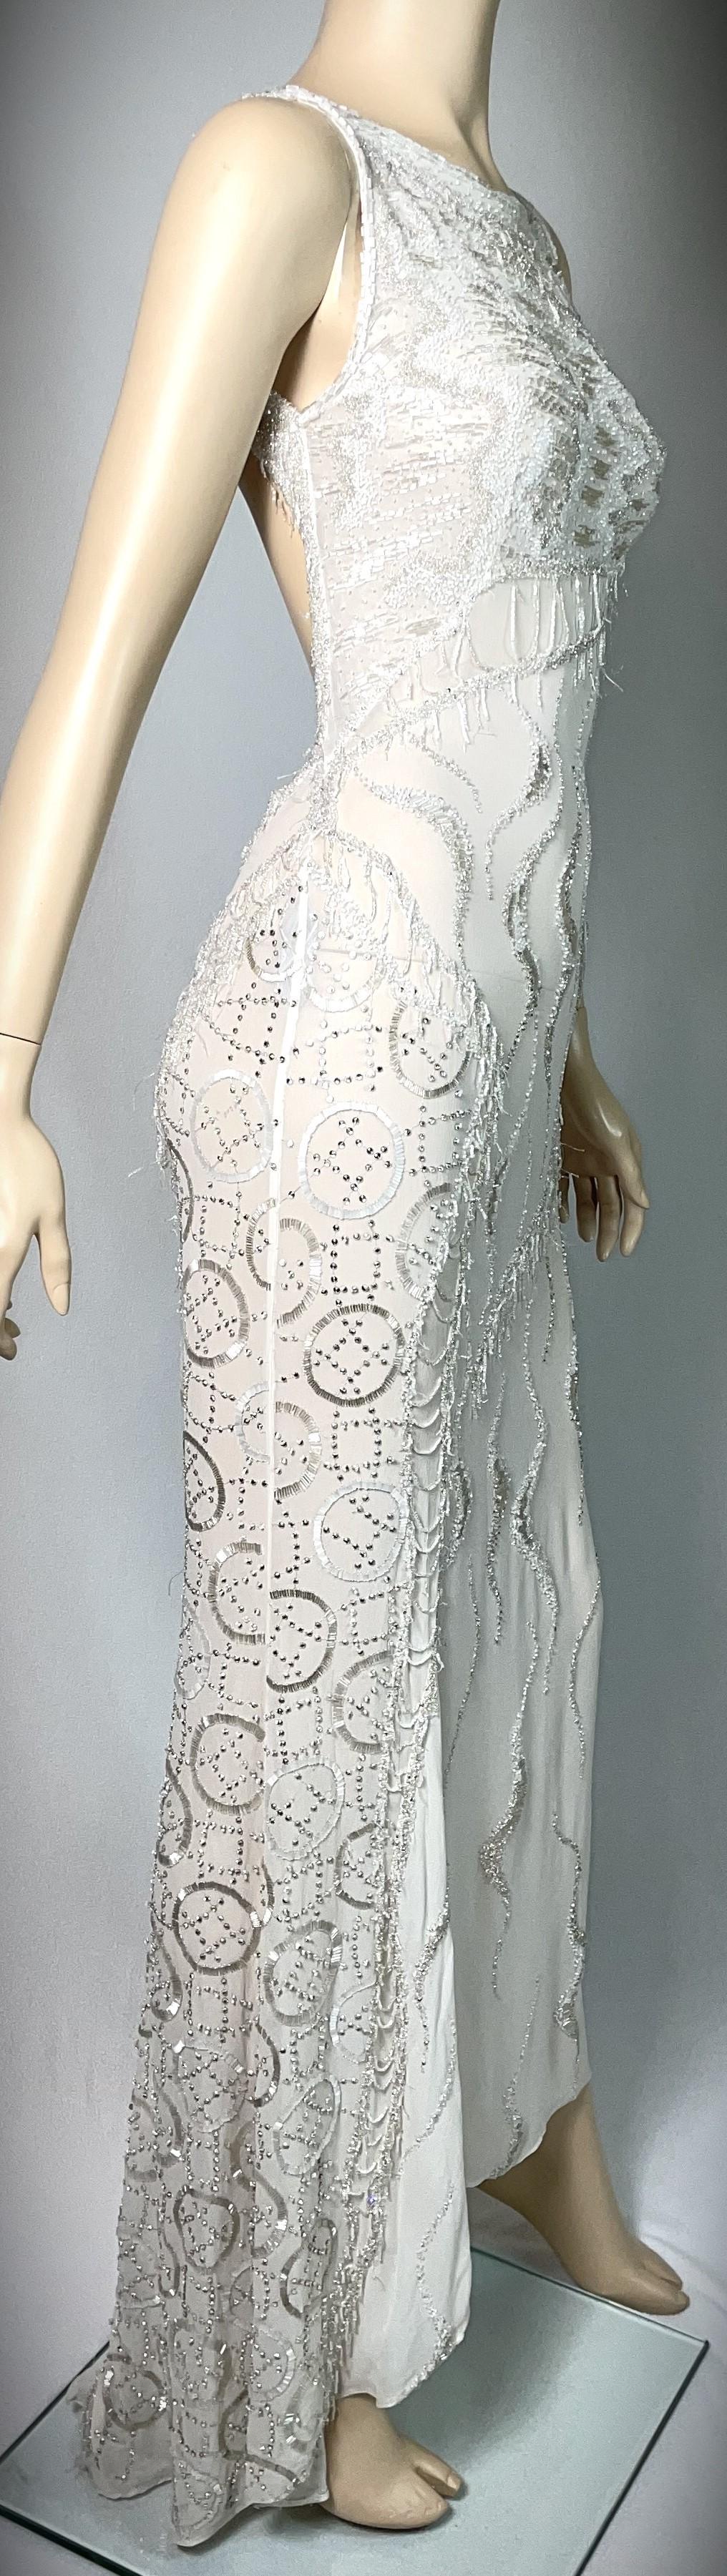 **THANK YOU FOR SHOPPING WITH MES DEUX FILLES**

DESIGNER: F/W 1998 Atelier Versace Runway
CONDITION: Good- minor bead loss- faint discoloration inside underarm, very minor and not seen- view last photo. 
FABRIC: Silk
COUNTRY MADE: Italy
SIZE: